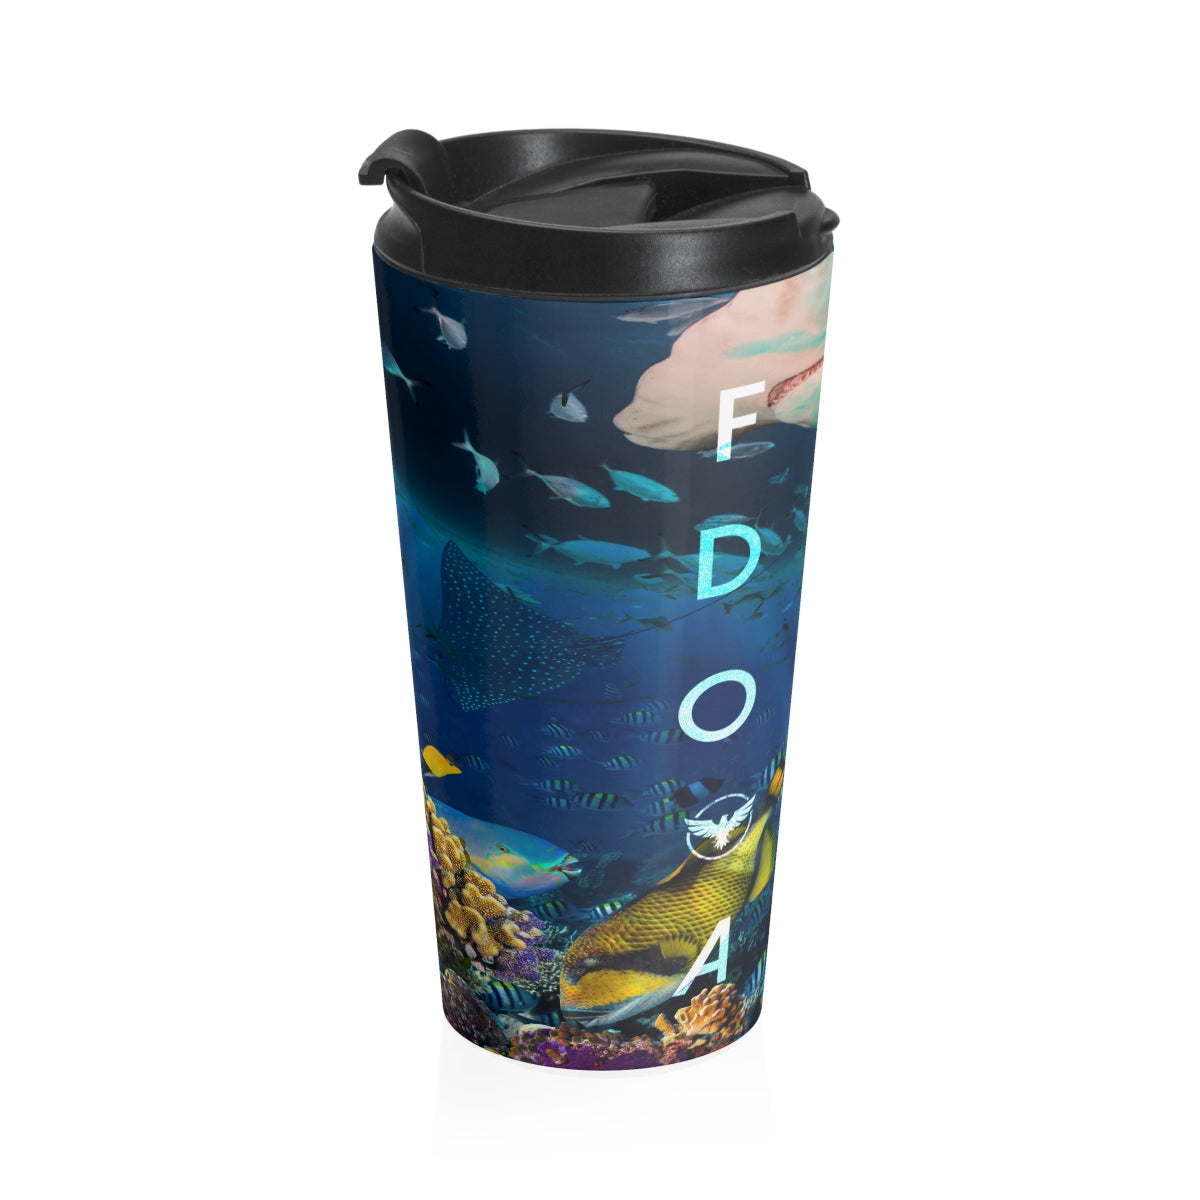 Ocean Life Stainless Steel Travel Mug FIND YOUR COAST  CO